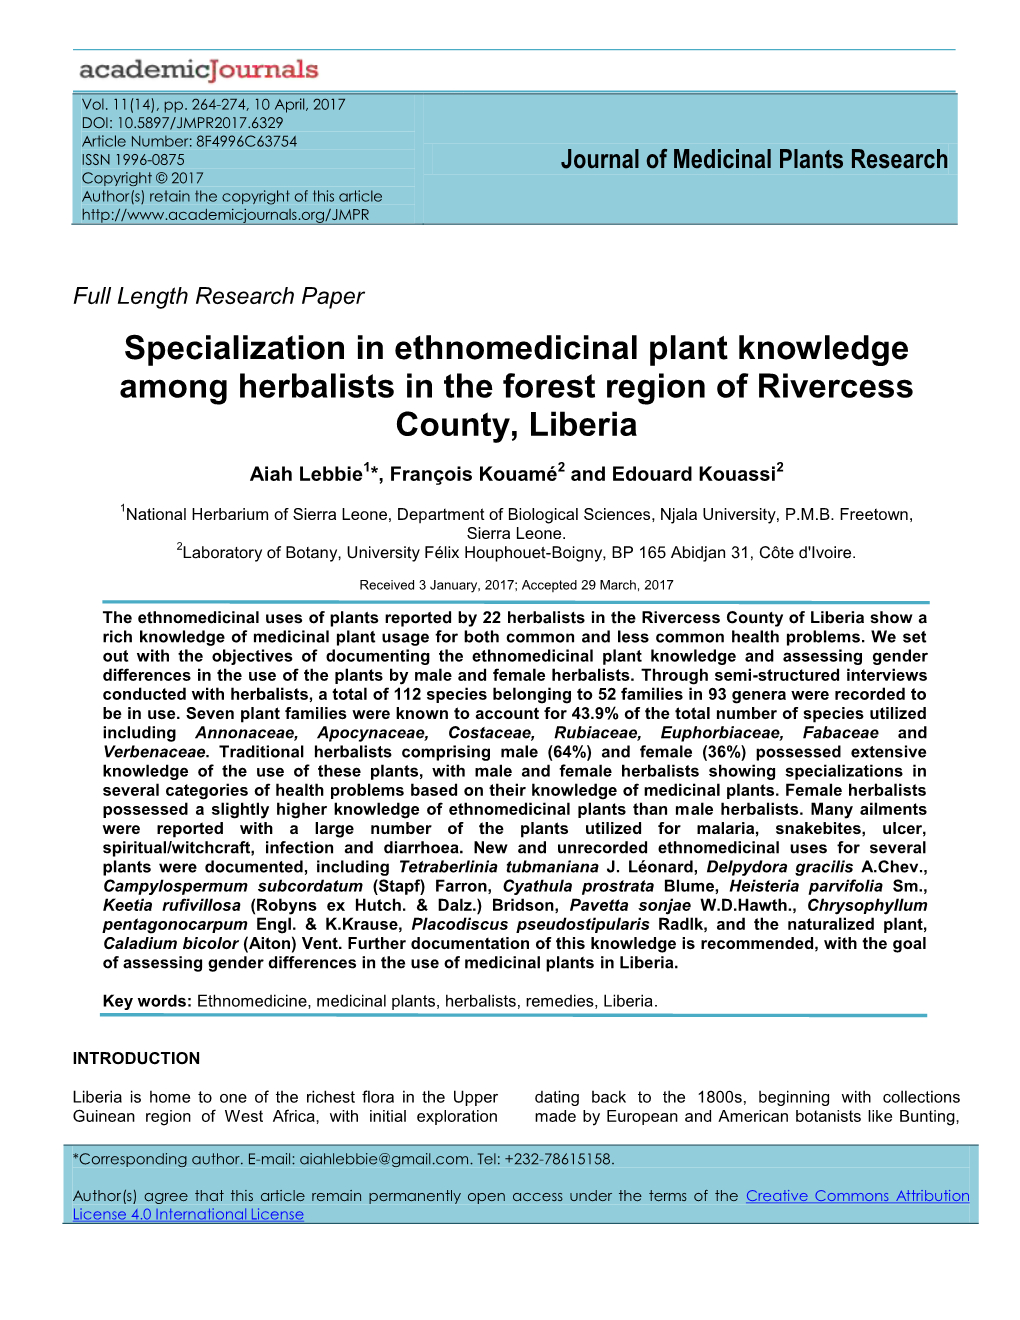 Specialization in Ethnomedicinal Plant Knowledge Among Herbalists in the Forest Region of Rivercess County, Liberia